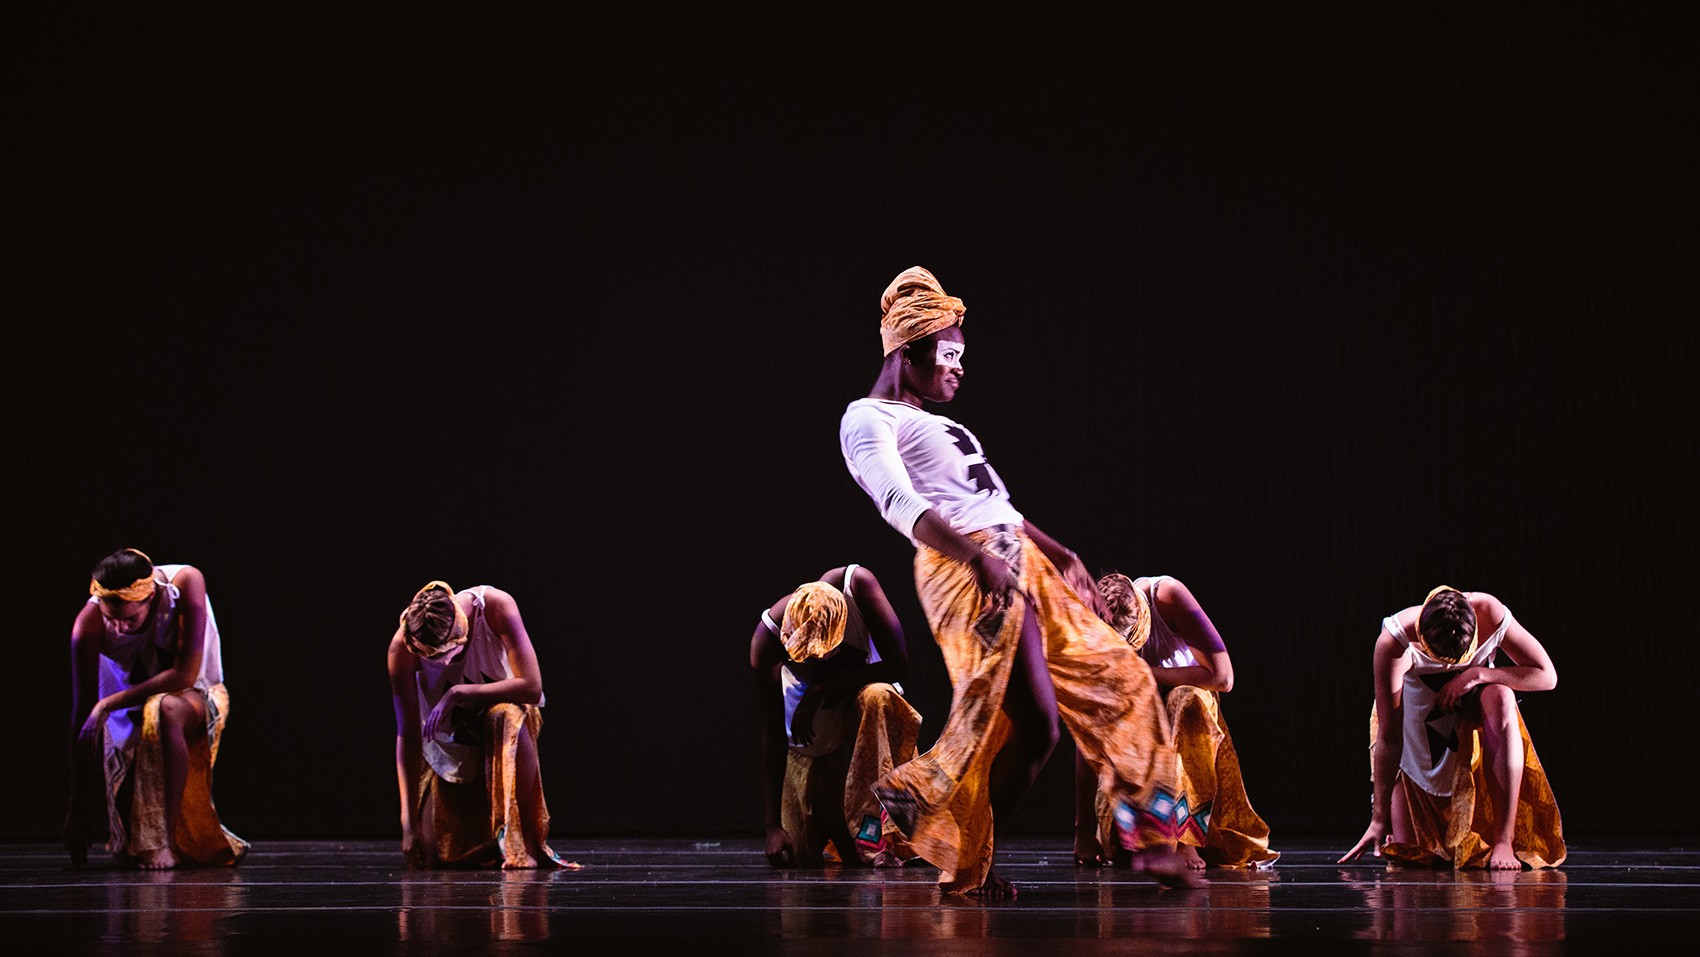 Five female dancers kneel on one knee, with one hand they touch the ground as they rest their other arm on leg that's not kneeling. They all bow their hands. In the foreground a solo dancer dances. All dancers are wearing traditional African prints.